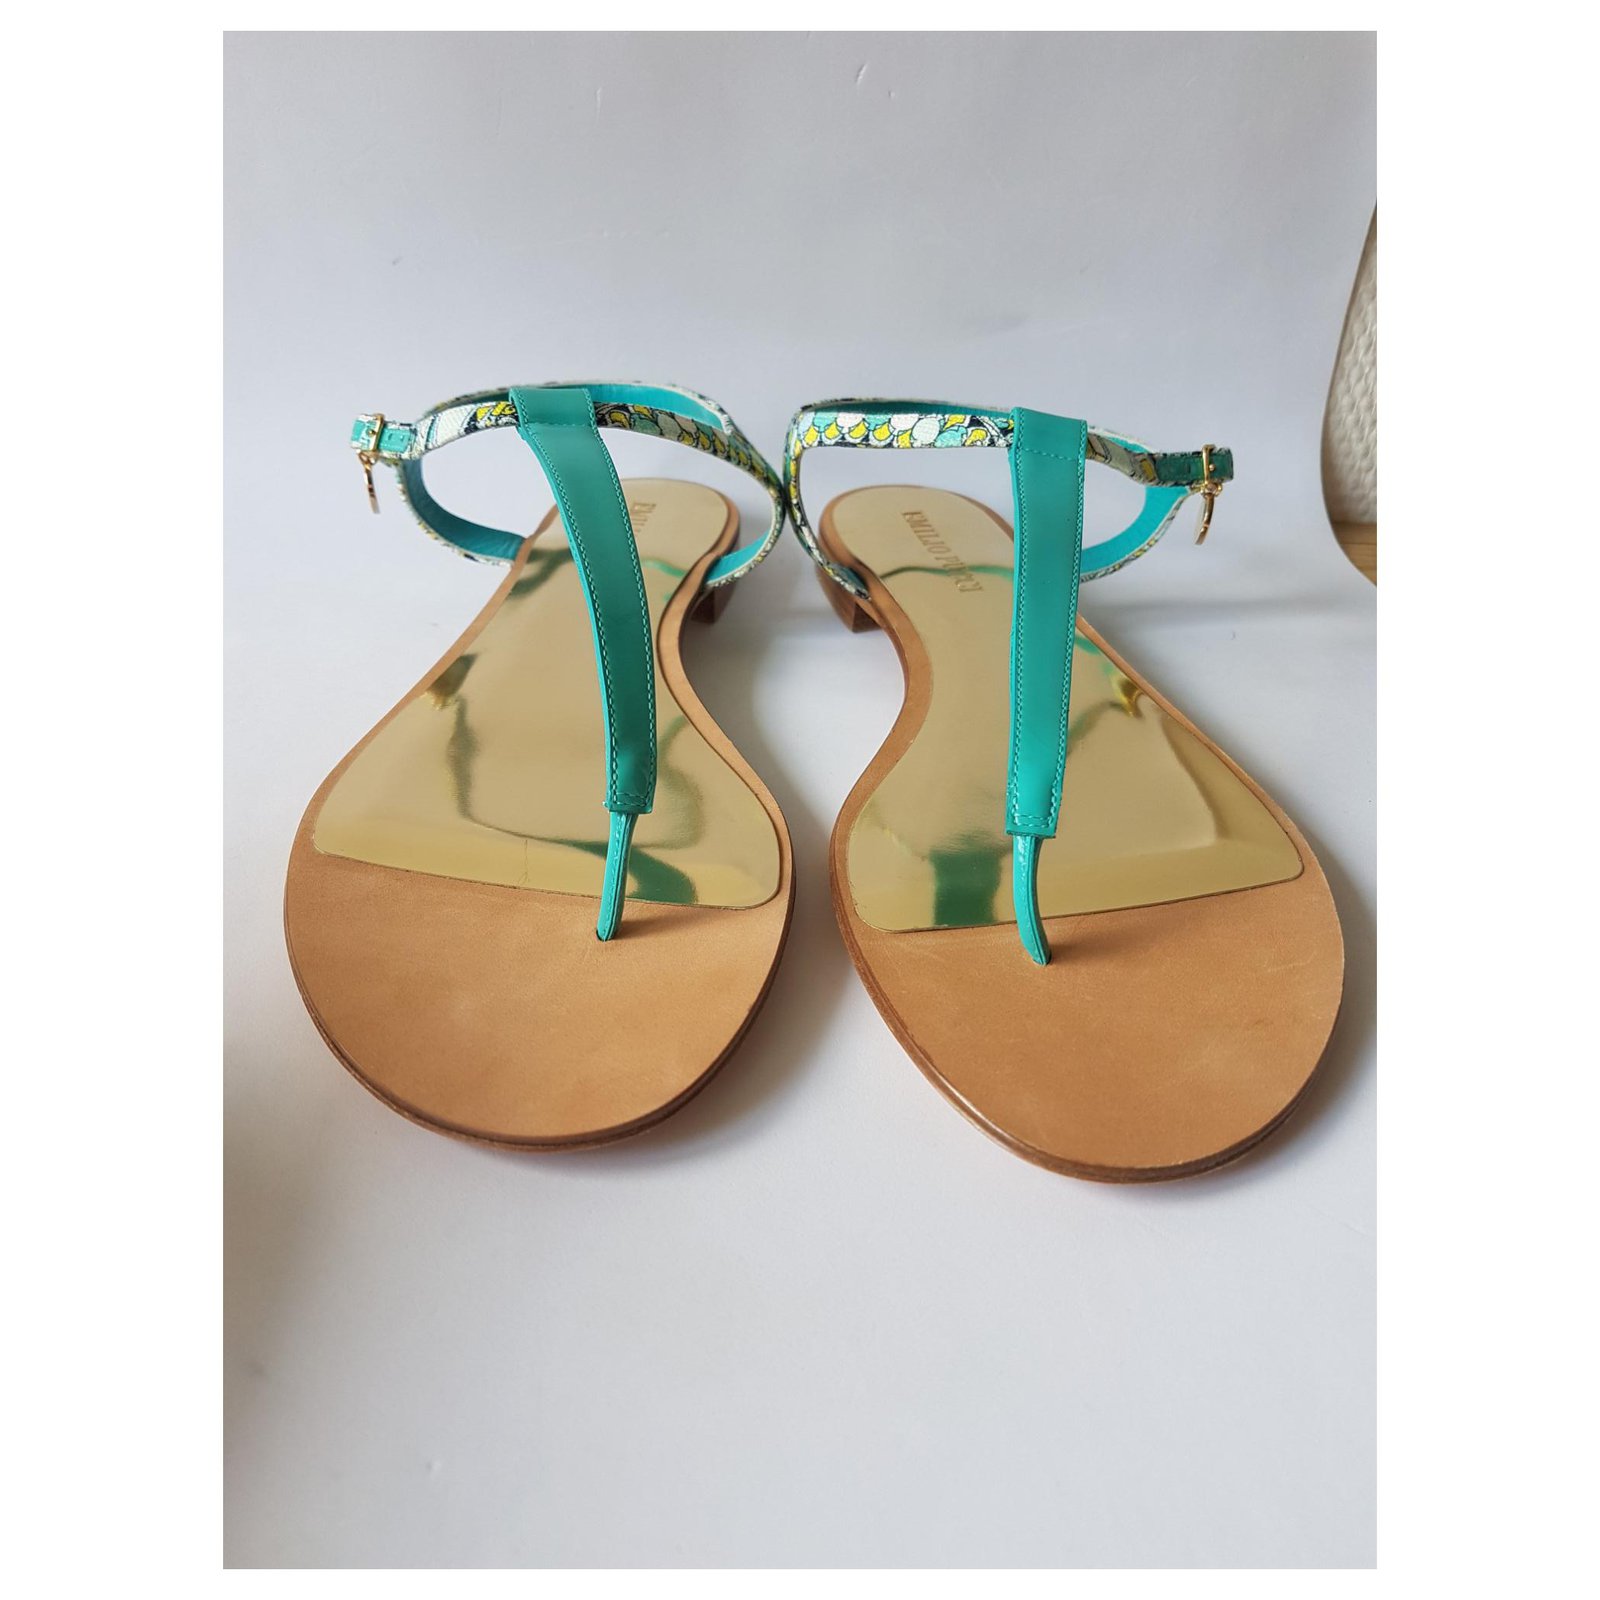 Emilio Pucci Sandals Multiple colors Light green Leather Patent leather ...